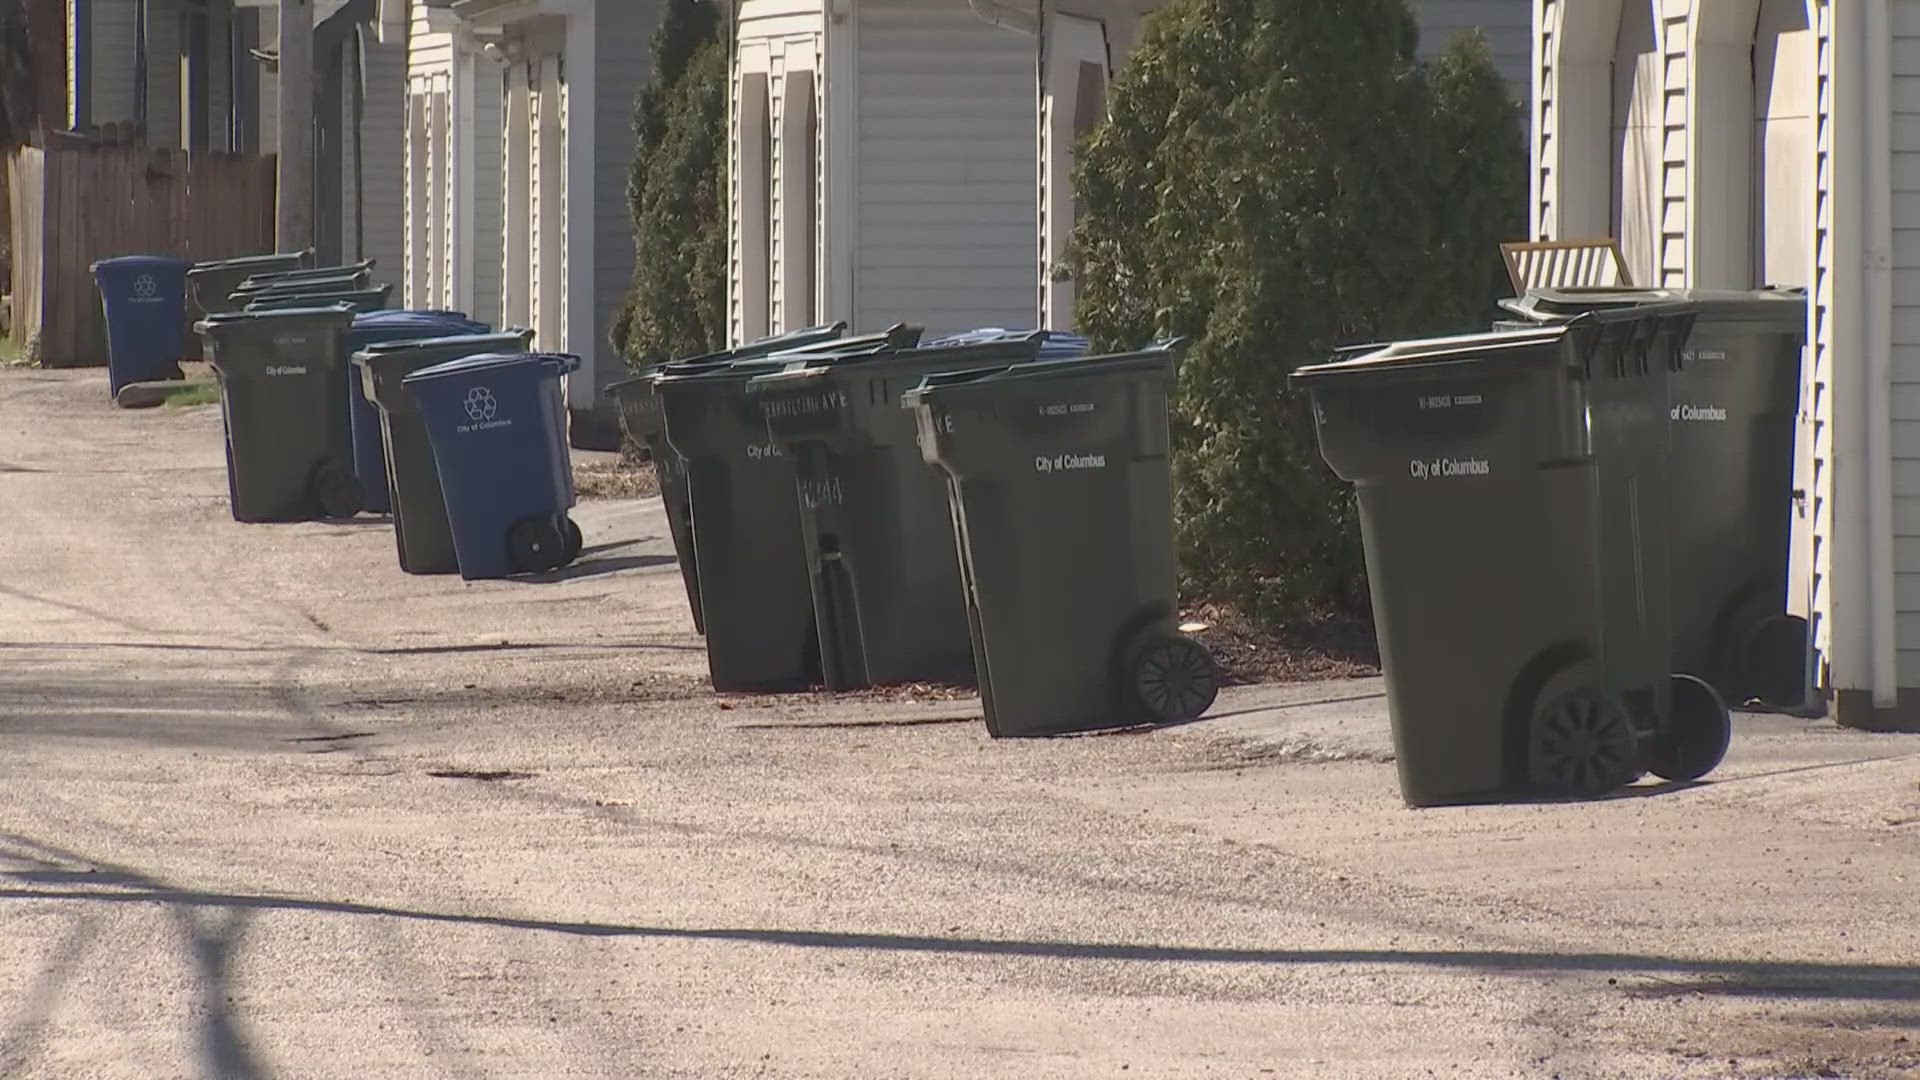 The city decided to make the transition away from shared trash bins to combat illegal dumping and the amount of time consumed by picking up spilled garbage.